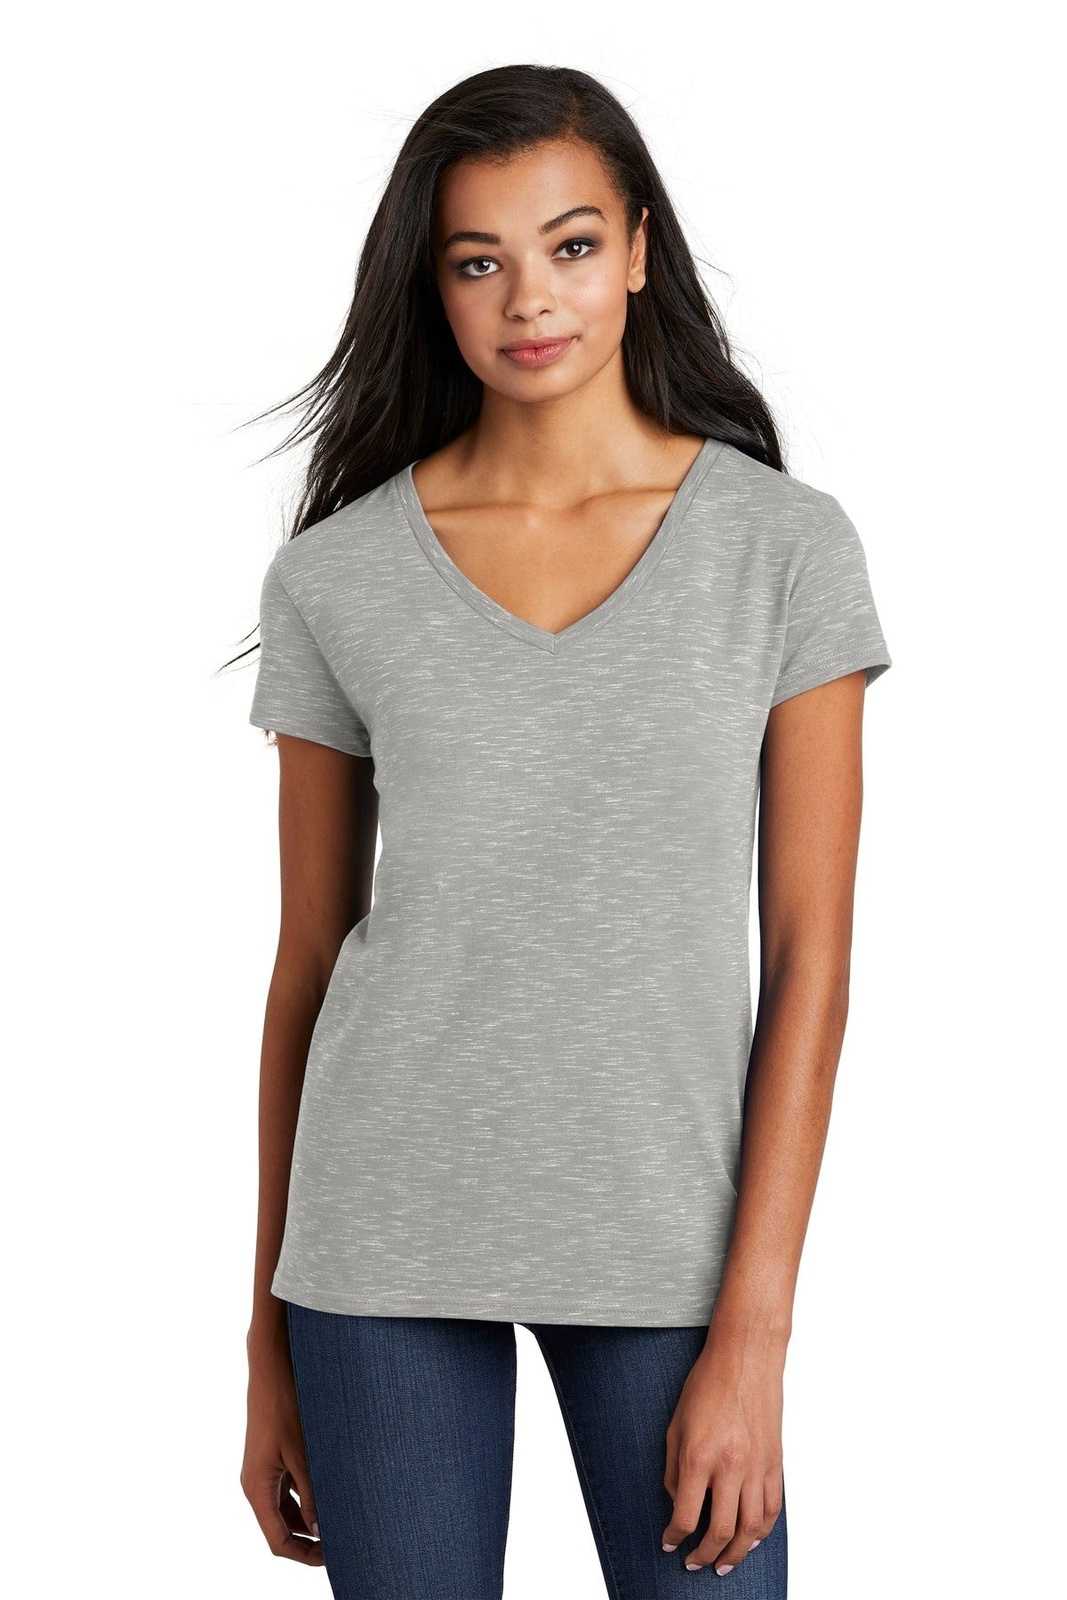 District DT664 Women's Medal V-Neck Tee - Light Gray - HIT a Double - 1